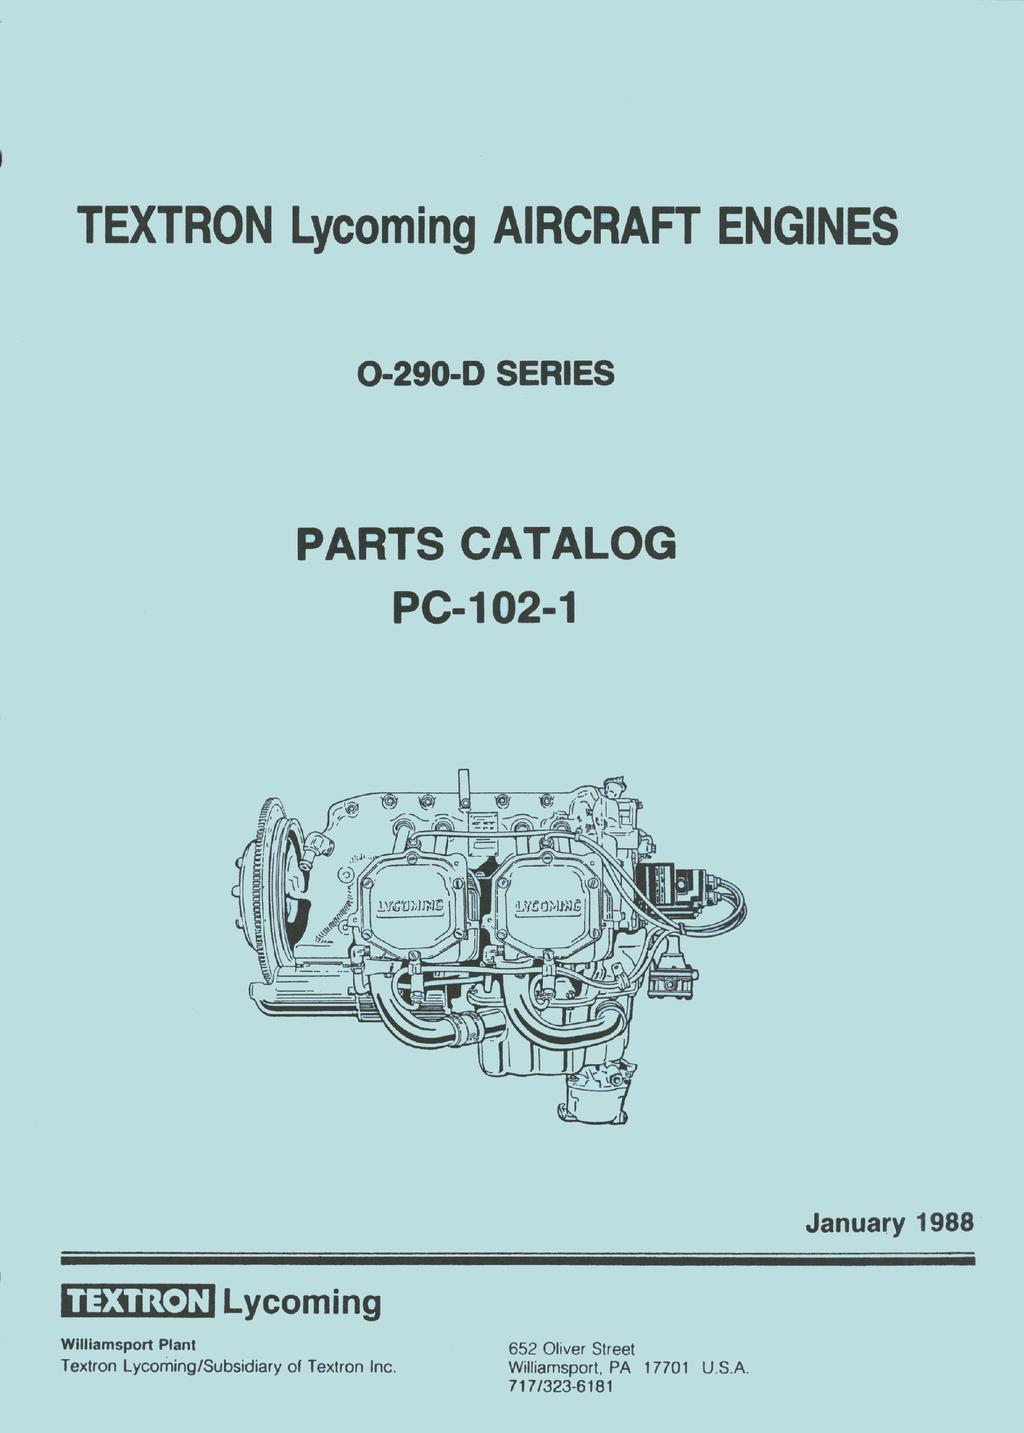 TEXTRON Lycoming AIRCRAFT ENGINES